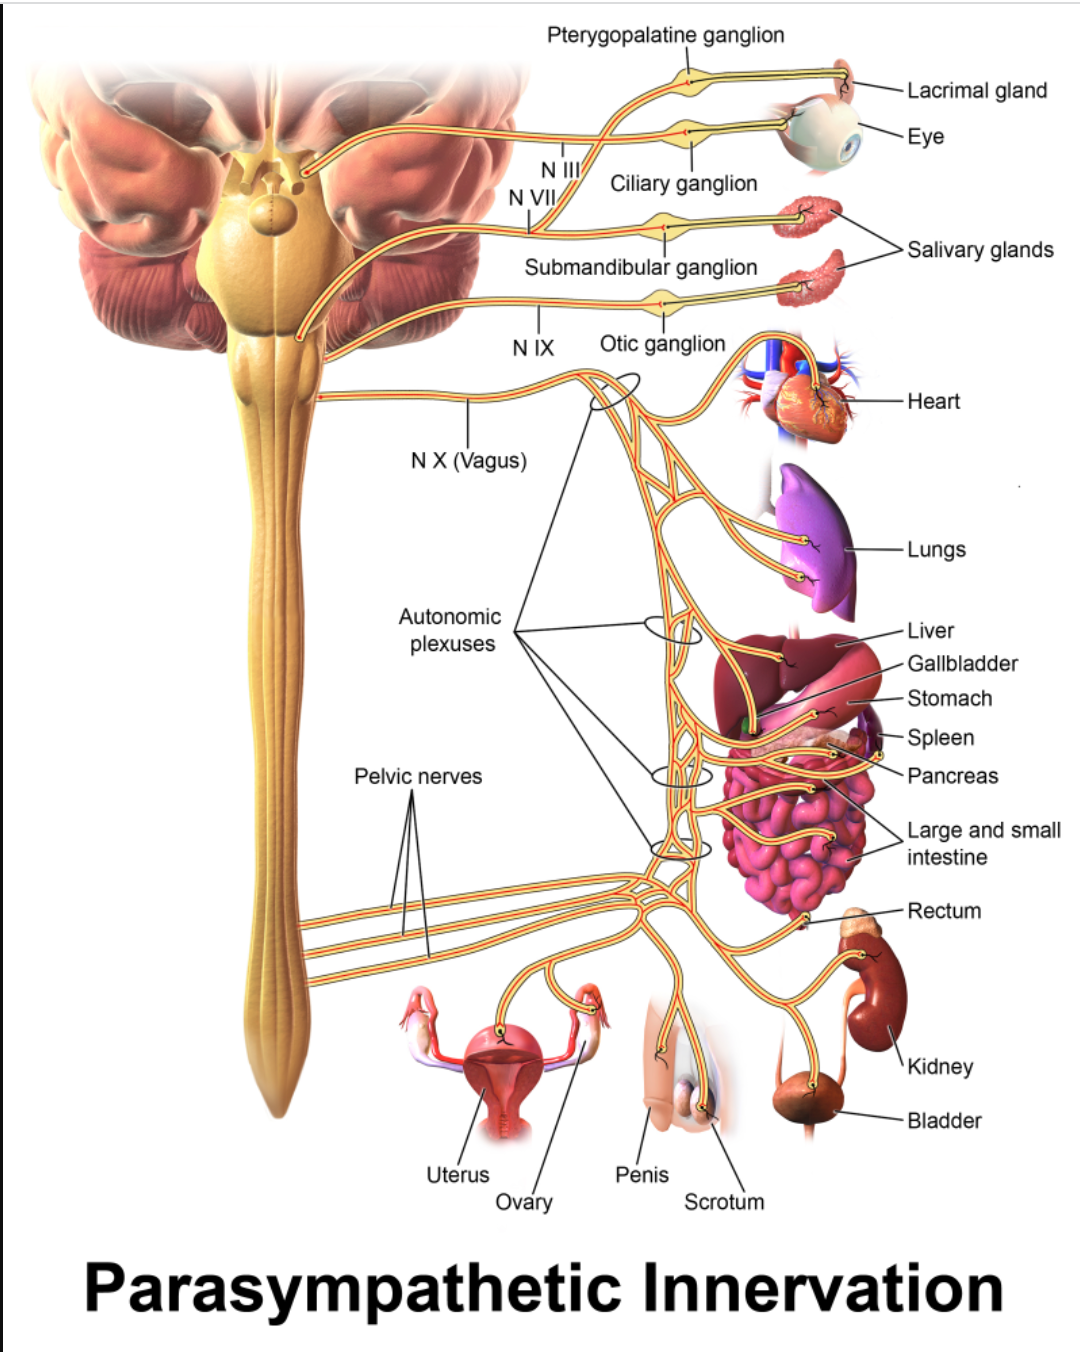 Image of the parasympathetic system labeled